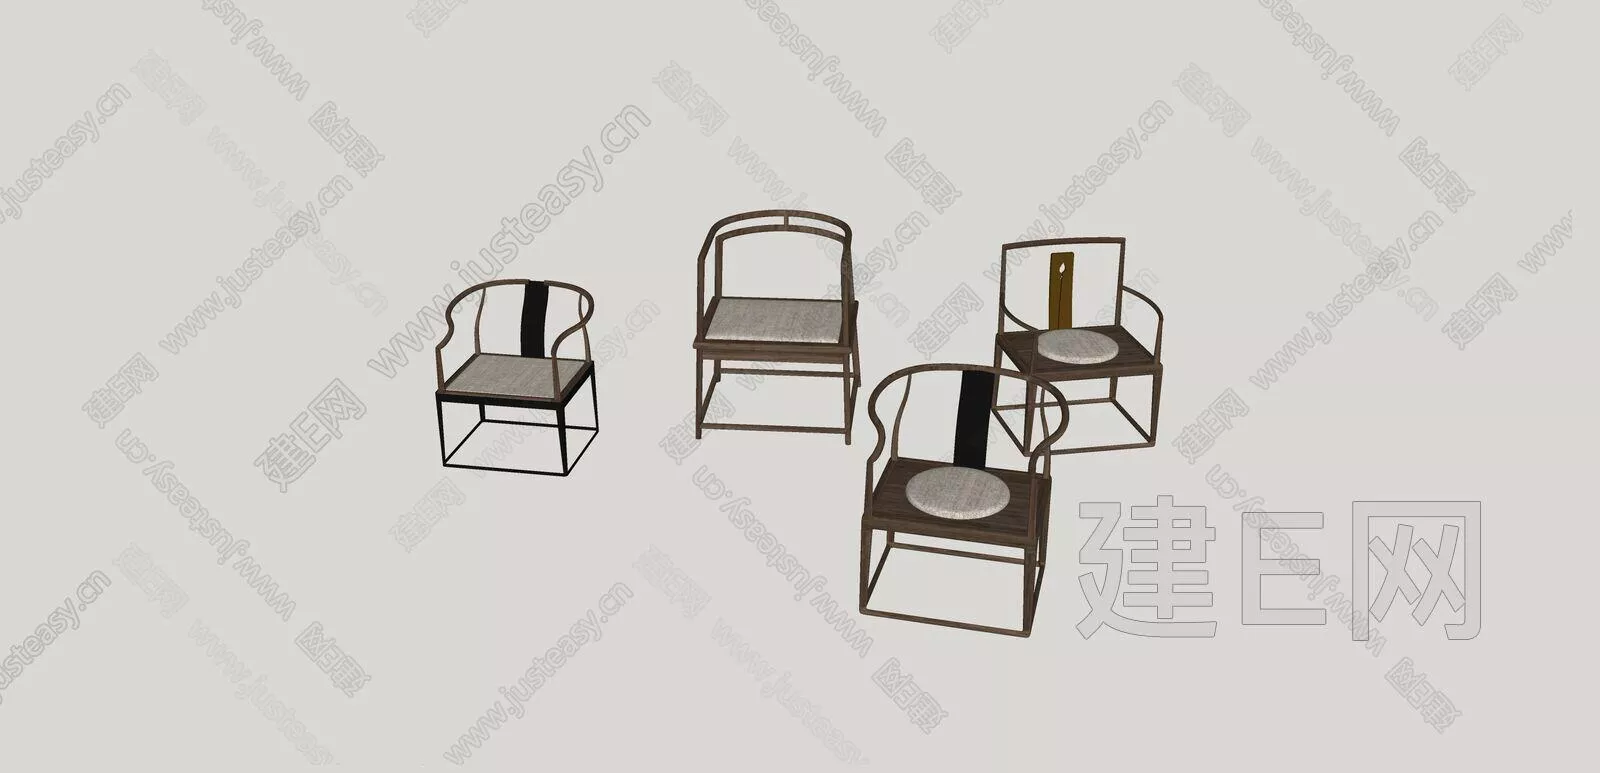 CHINESE OFFICE CHAIR - SKETCHUP 3D MODEL - ENSCAPE - 104939940